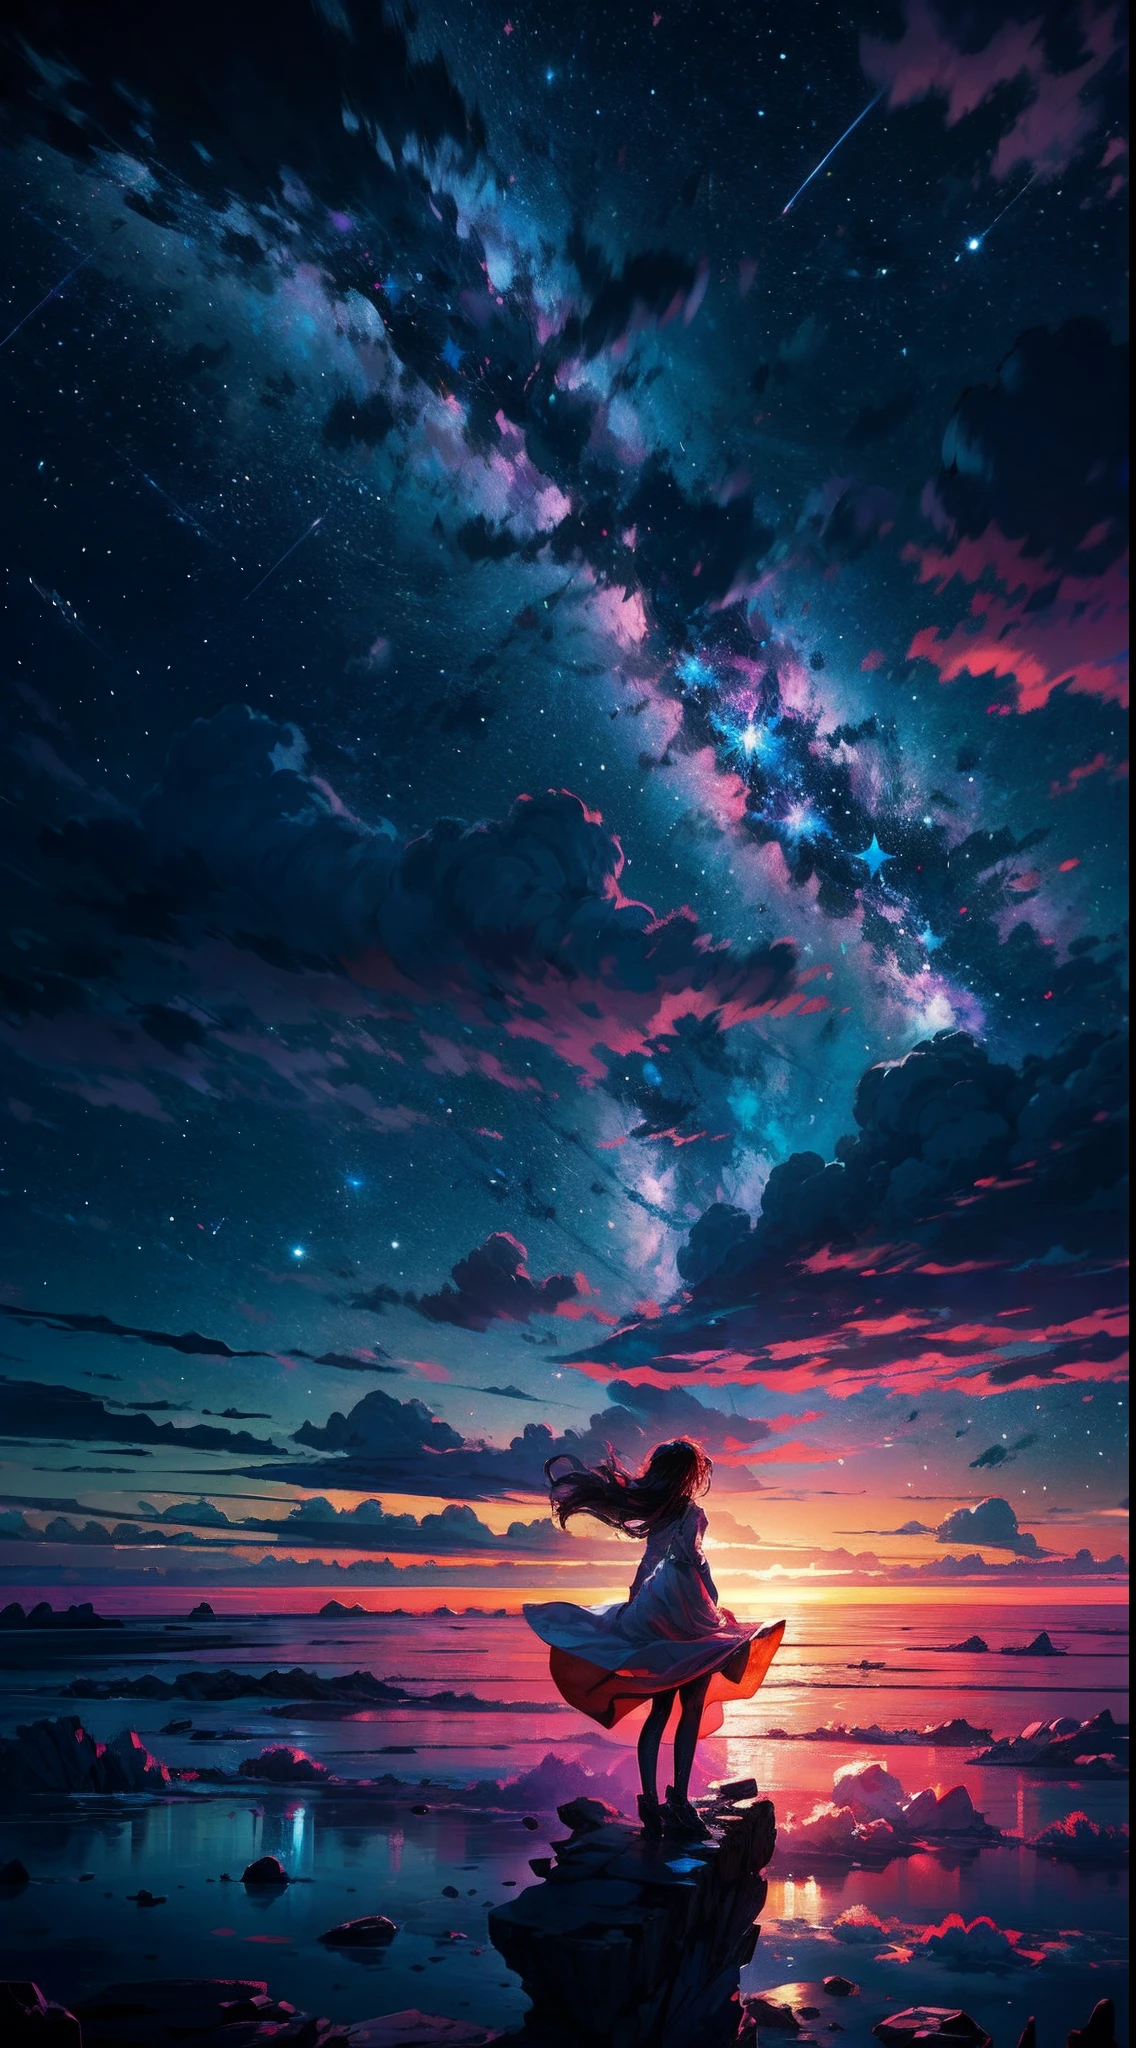 Perched upon a wispy cloud, a young girl gazes in awe at the breathtaking expanse above. The night sky comes alive with a sea of stars, twinkling like diamonds scattered across a velvet canvas. Cosmic phenomenons swirl and dance, painting streaks of vibrant colors across the vastness of space. With her hair gently tousled by the celestial breeze, the girl's silhouette stands as a witness to the beauty of the universe. Serene and filled with wonder, she becomes a part of this cosmic symphony, her presence illuminating the infinite possibilities that lie beyond the clouds.